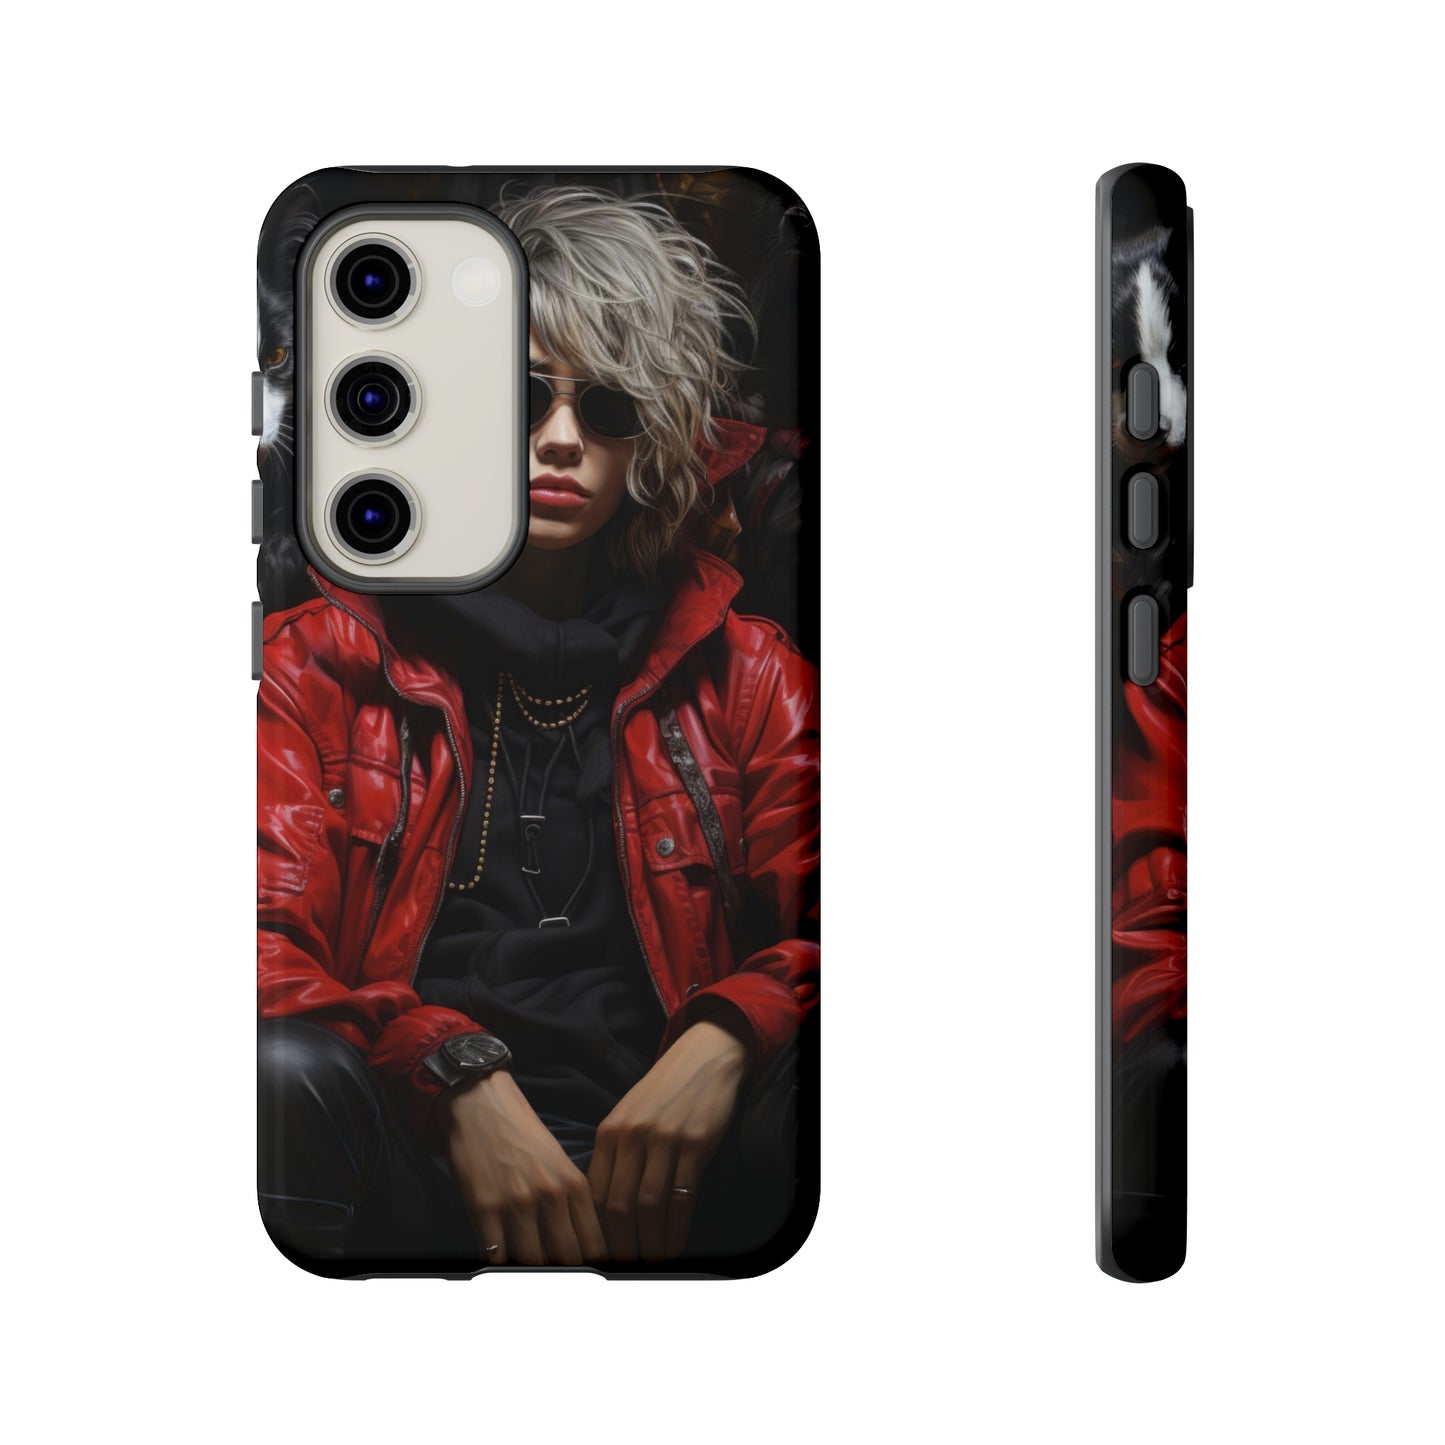 Red Rebel Realm: Woman in Leather Jacket with Fantasy Dogs Phone Case for iPhone, Samsung, Pixel